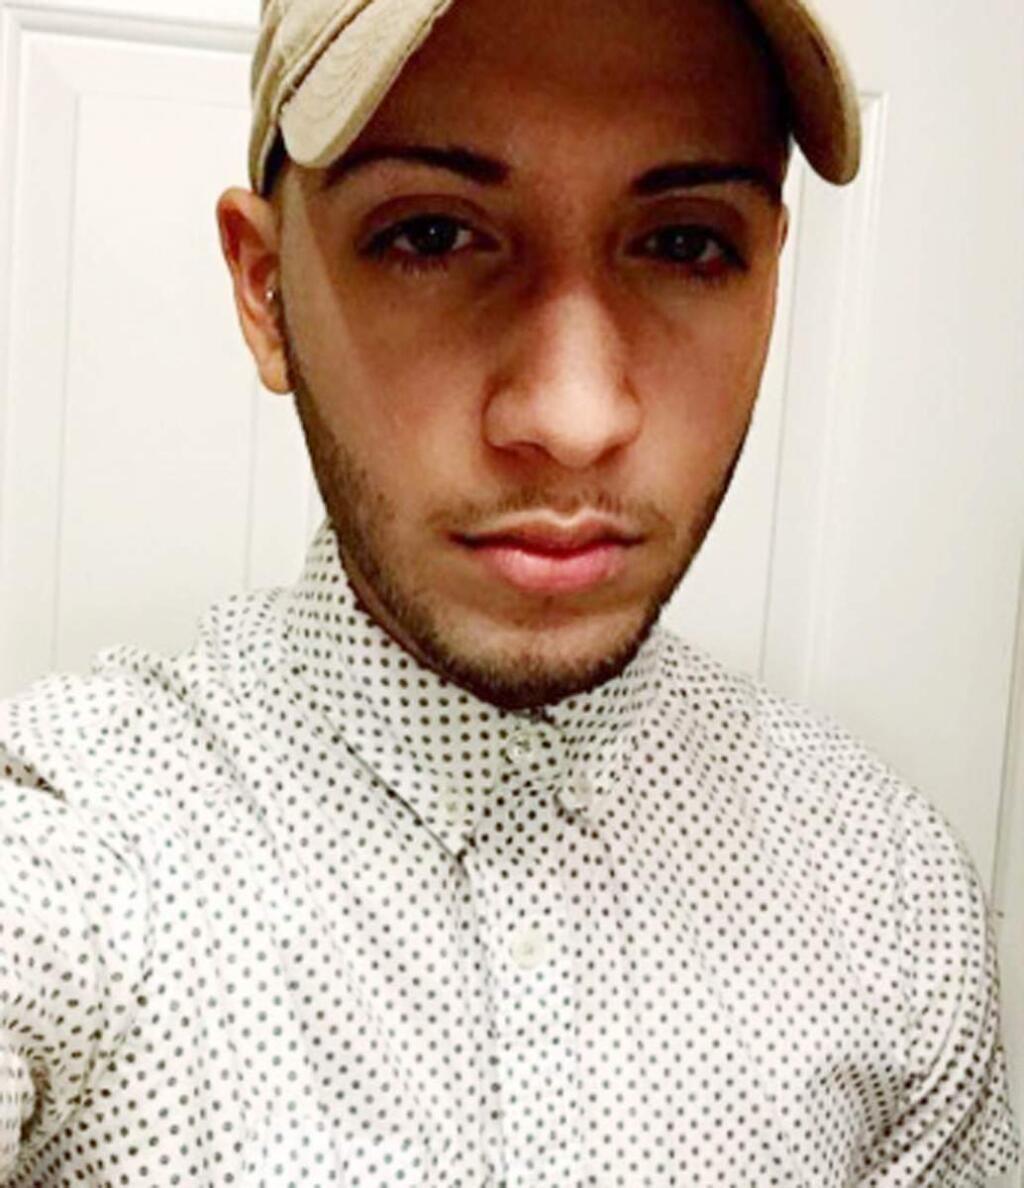 This undated photo shows Luis Omar Ocasio-Capo, one of the people killed in the Pulse nightclub in Orlando, Fla., early Sunday, June 12, 2016. A gunman wielding an assault-type rifle and a handgun opened fire inside the nightclub, killing dozens in the worst mass shooting in modern U.S. history. (Facebook via AP)